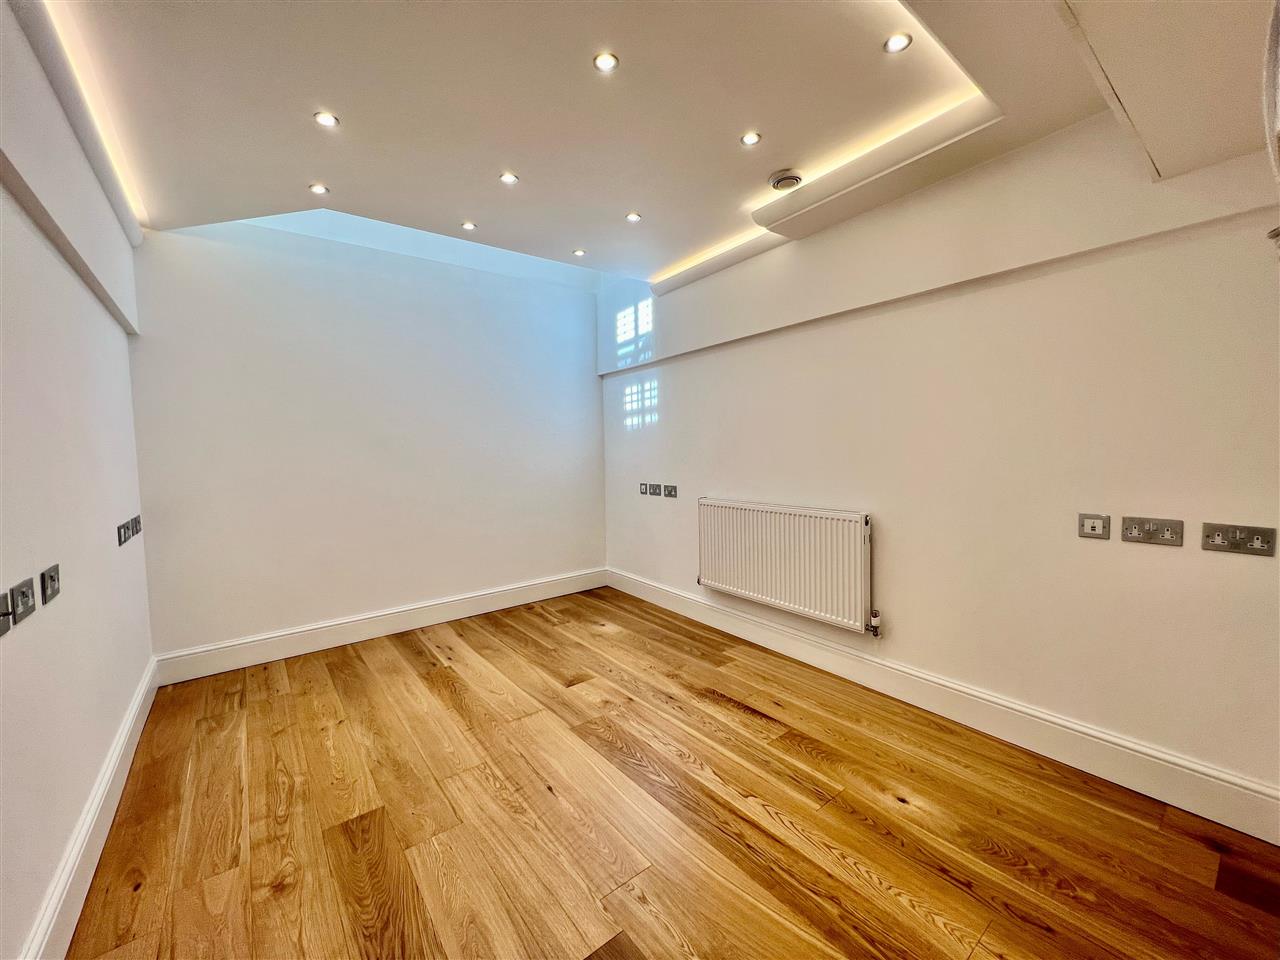 2 bed mews house to rent - Property Image 1